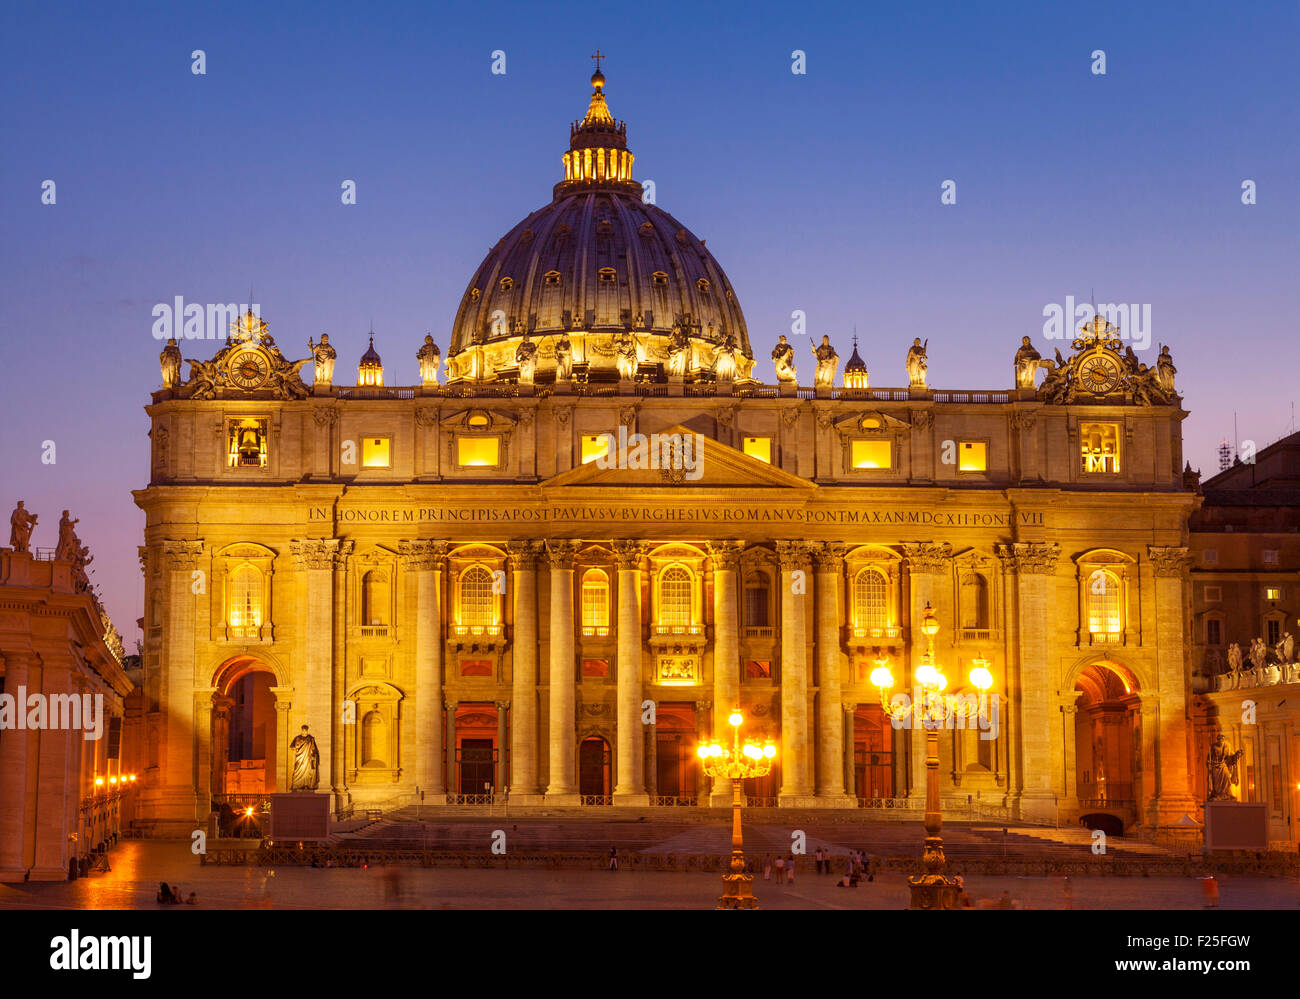 ITALY ROME THE VATICAN CITY St Peters Square and St Peters Basilica Vatican City ay night Roma Rome Lazio Italy EU Europe Stock Photo